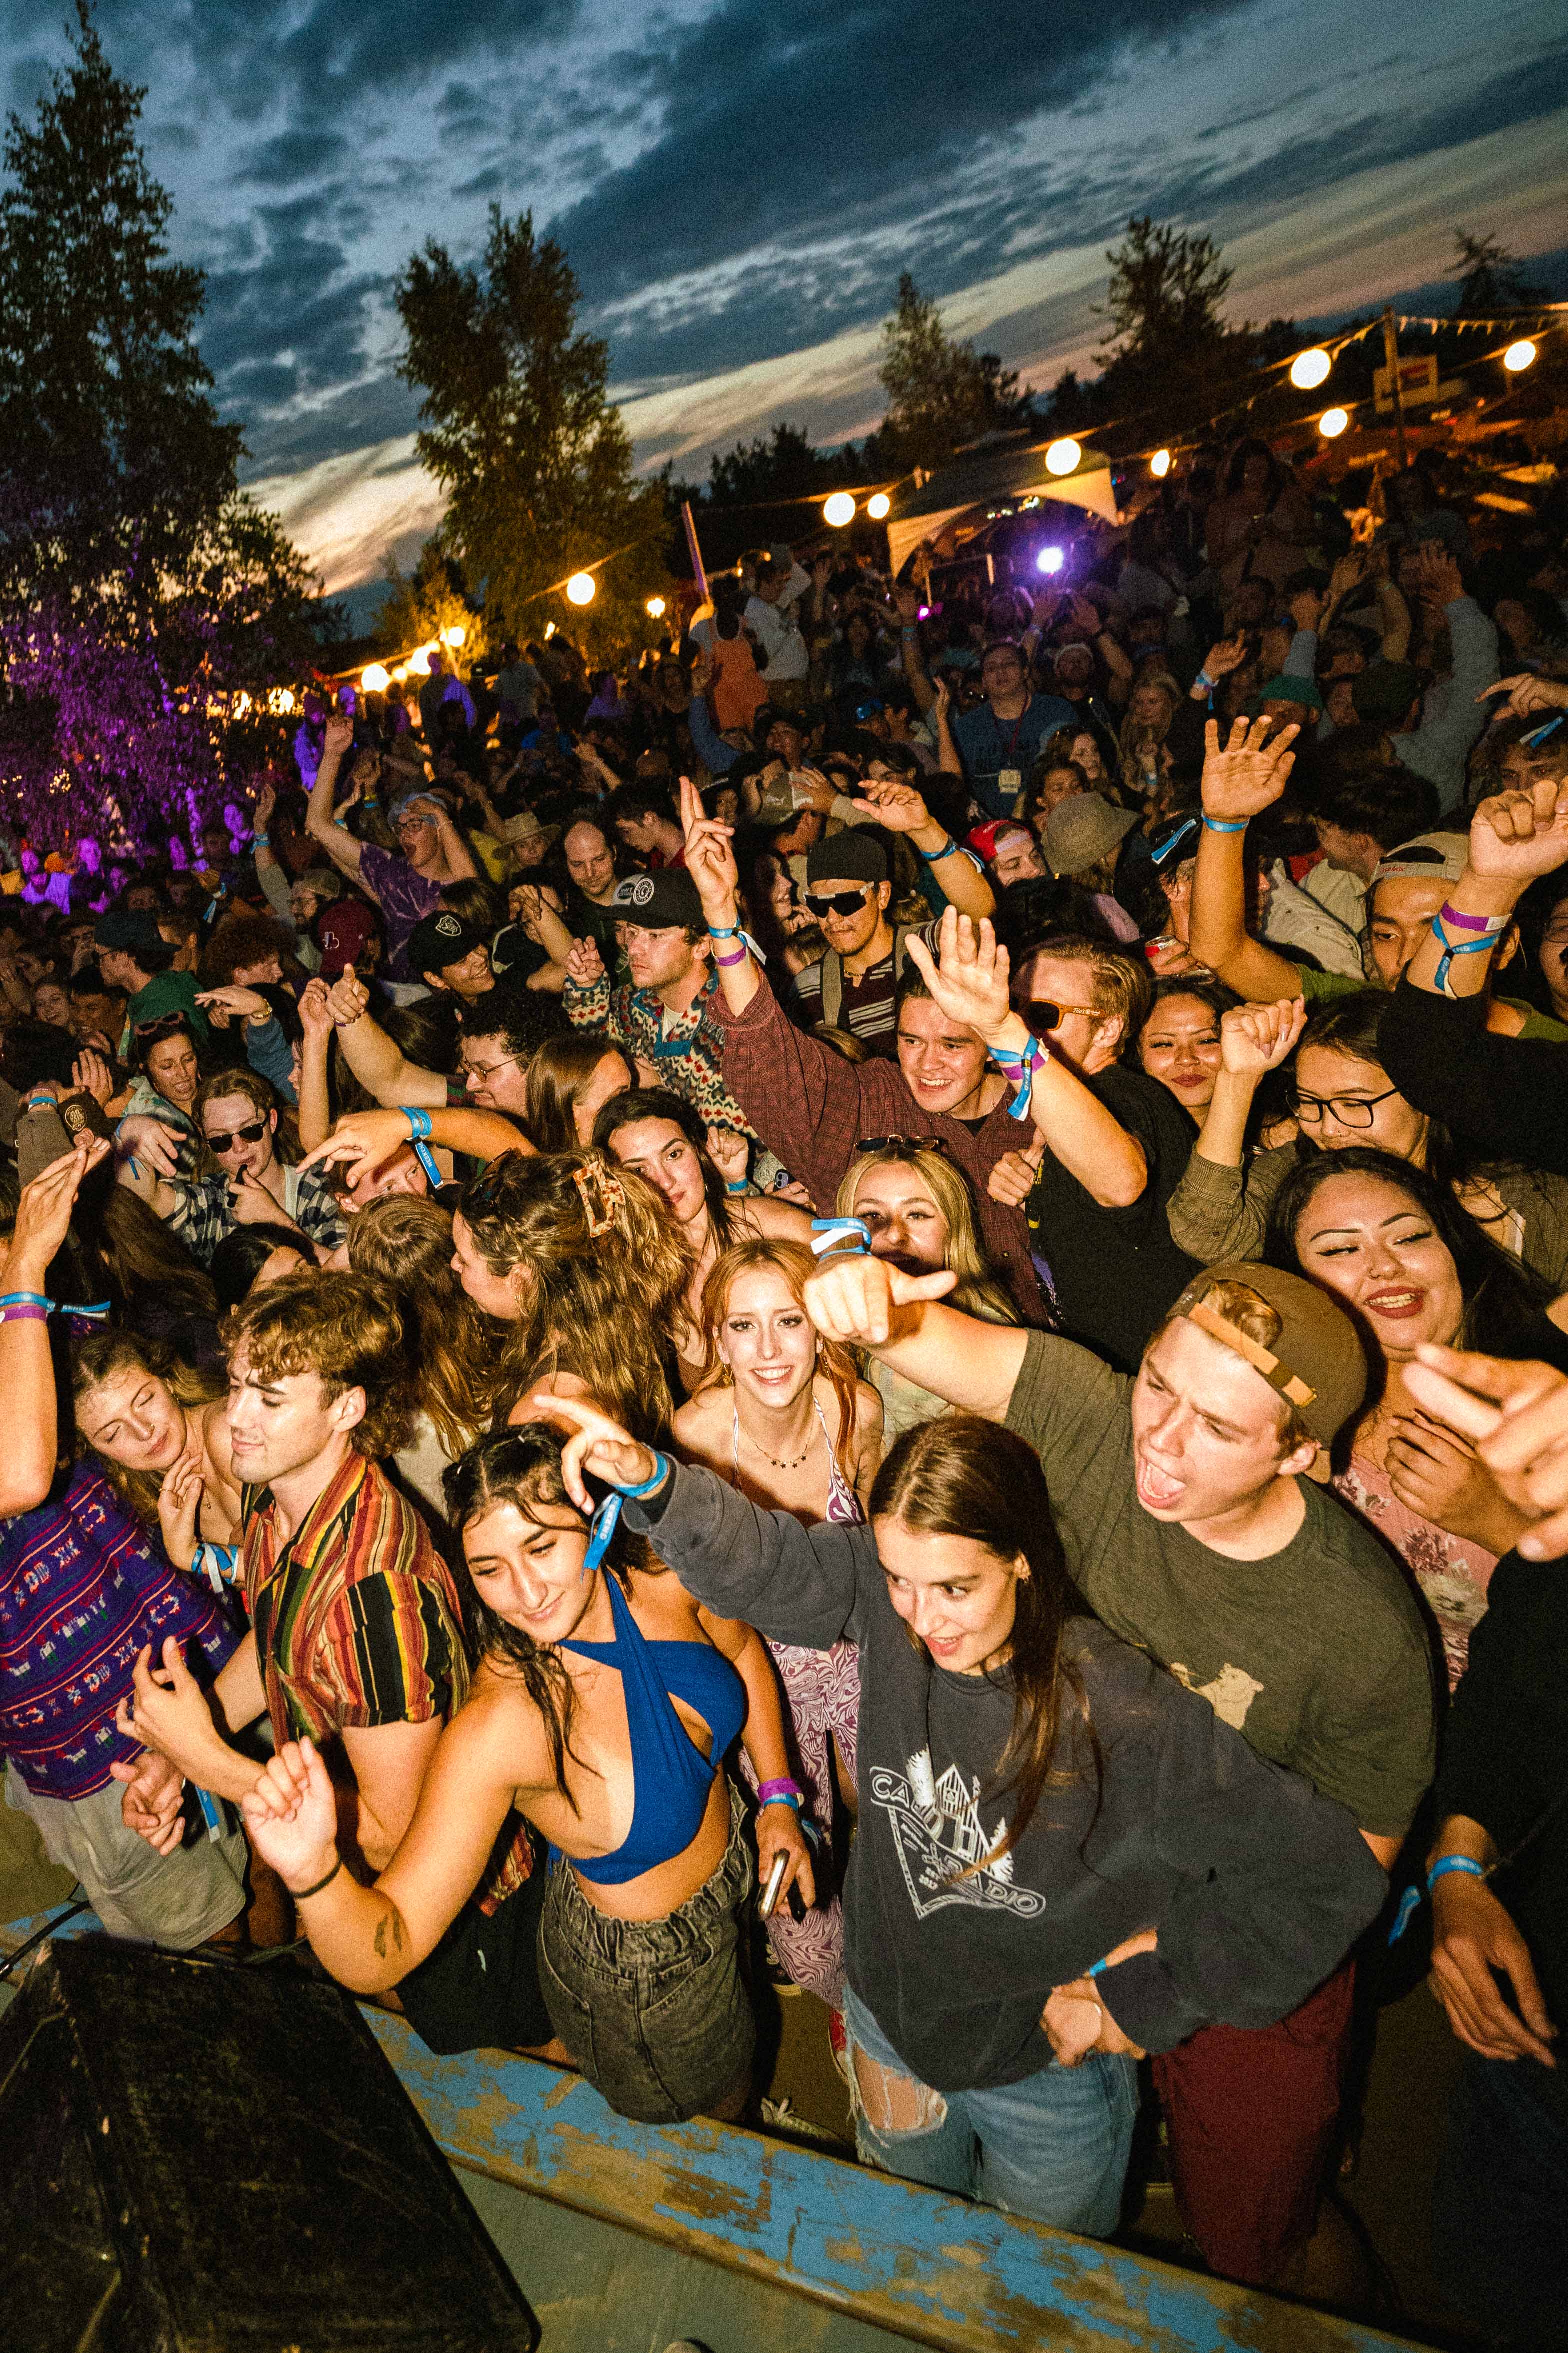 Festival-goers dance in front of stage